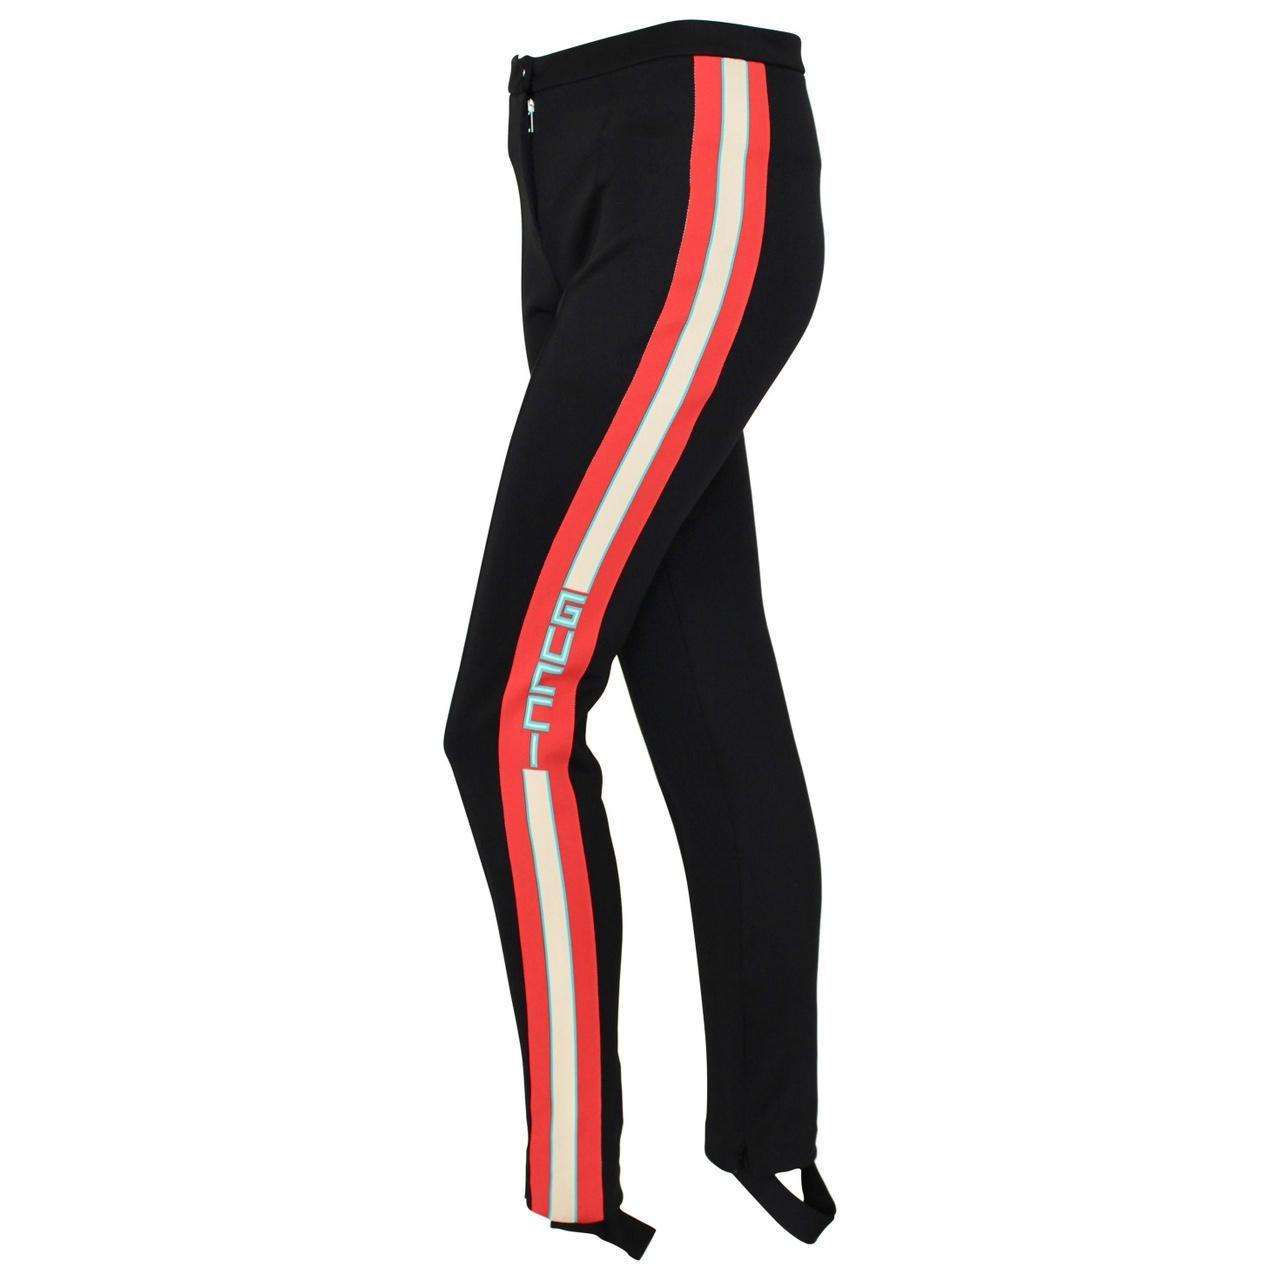 Gucci Black Knit Jersey Stirrup Leggings with Red White Stripe - S